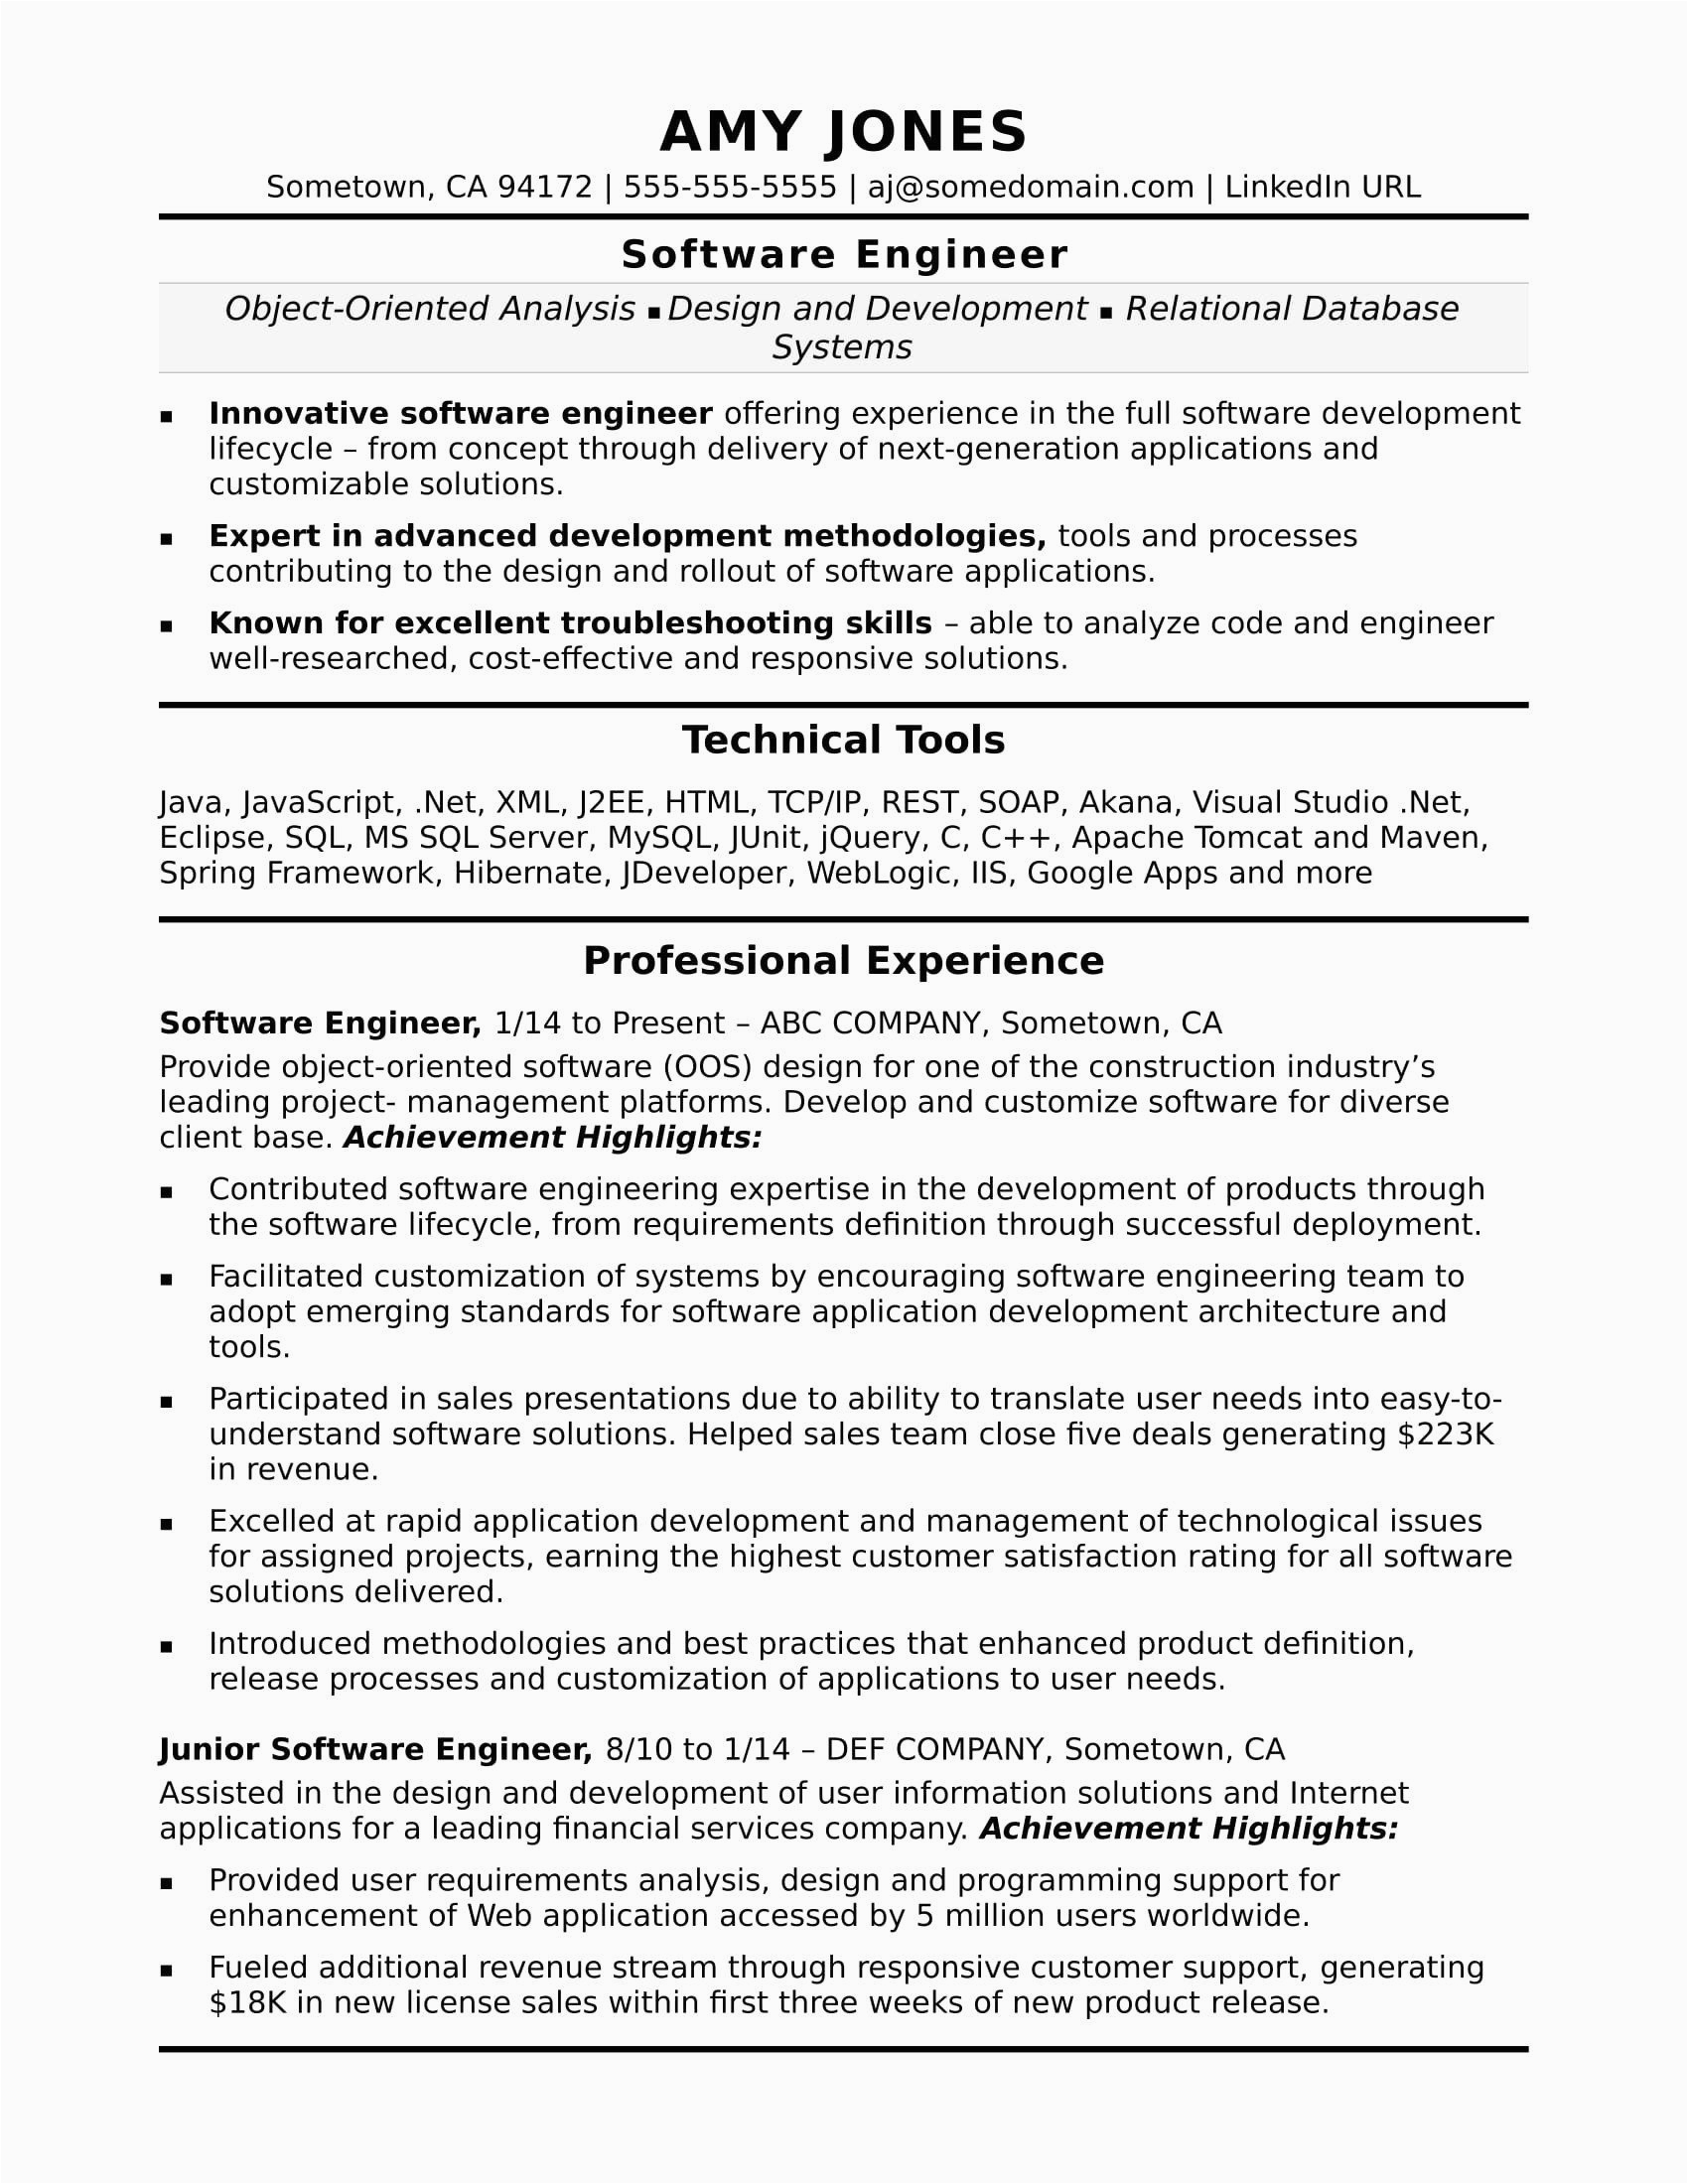 Software Engineer Experience Resume format Sample software Developer Resume No Experience Awesome Junior software